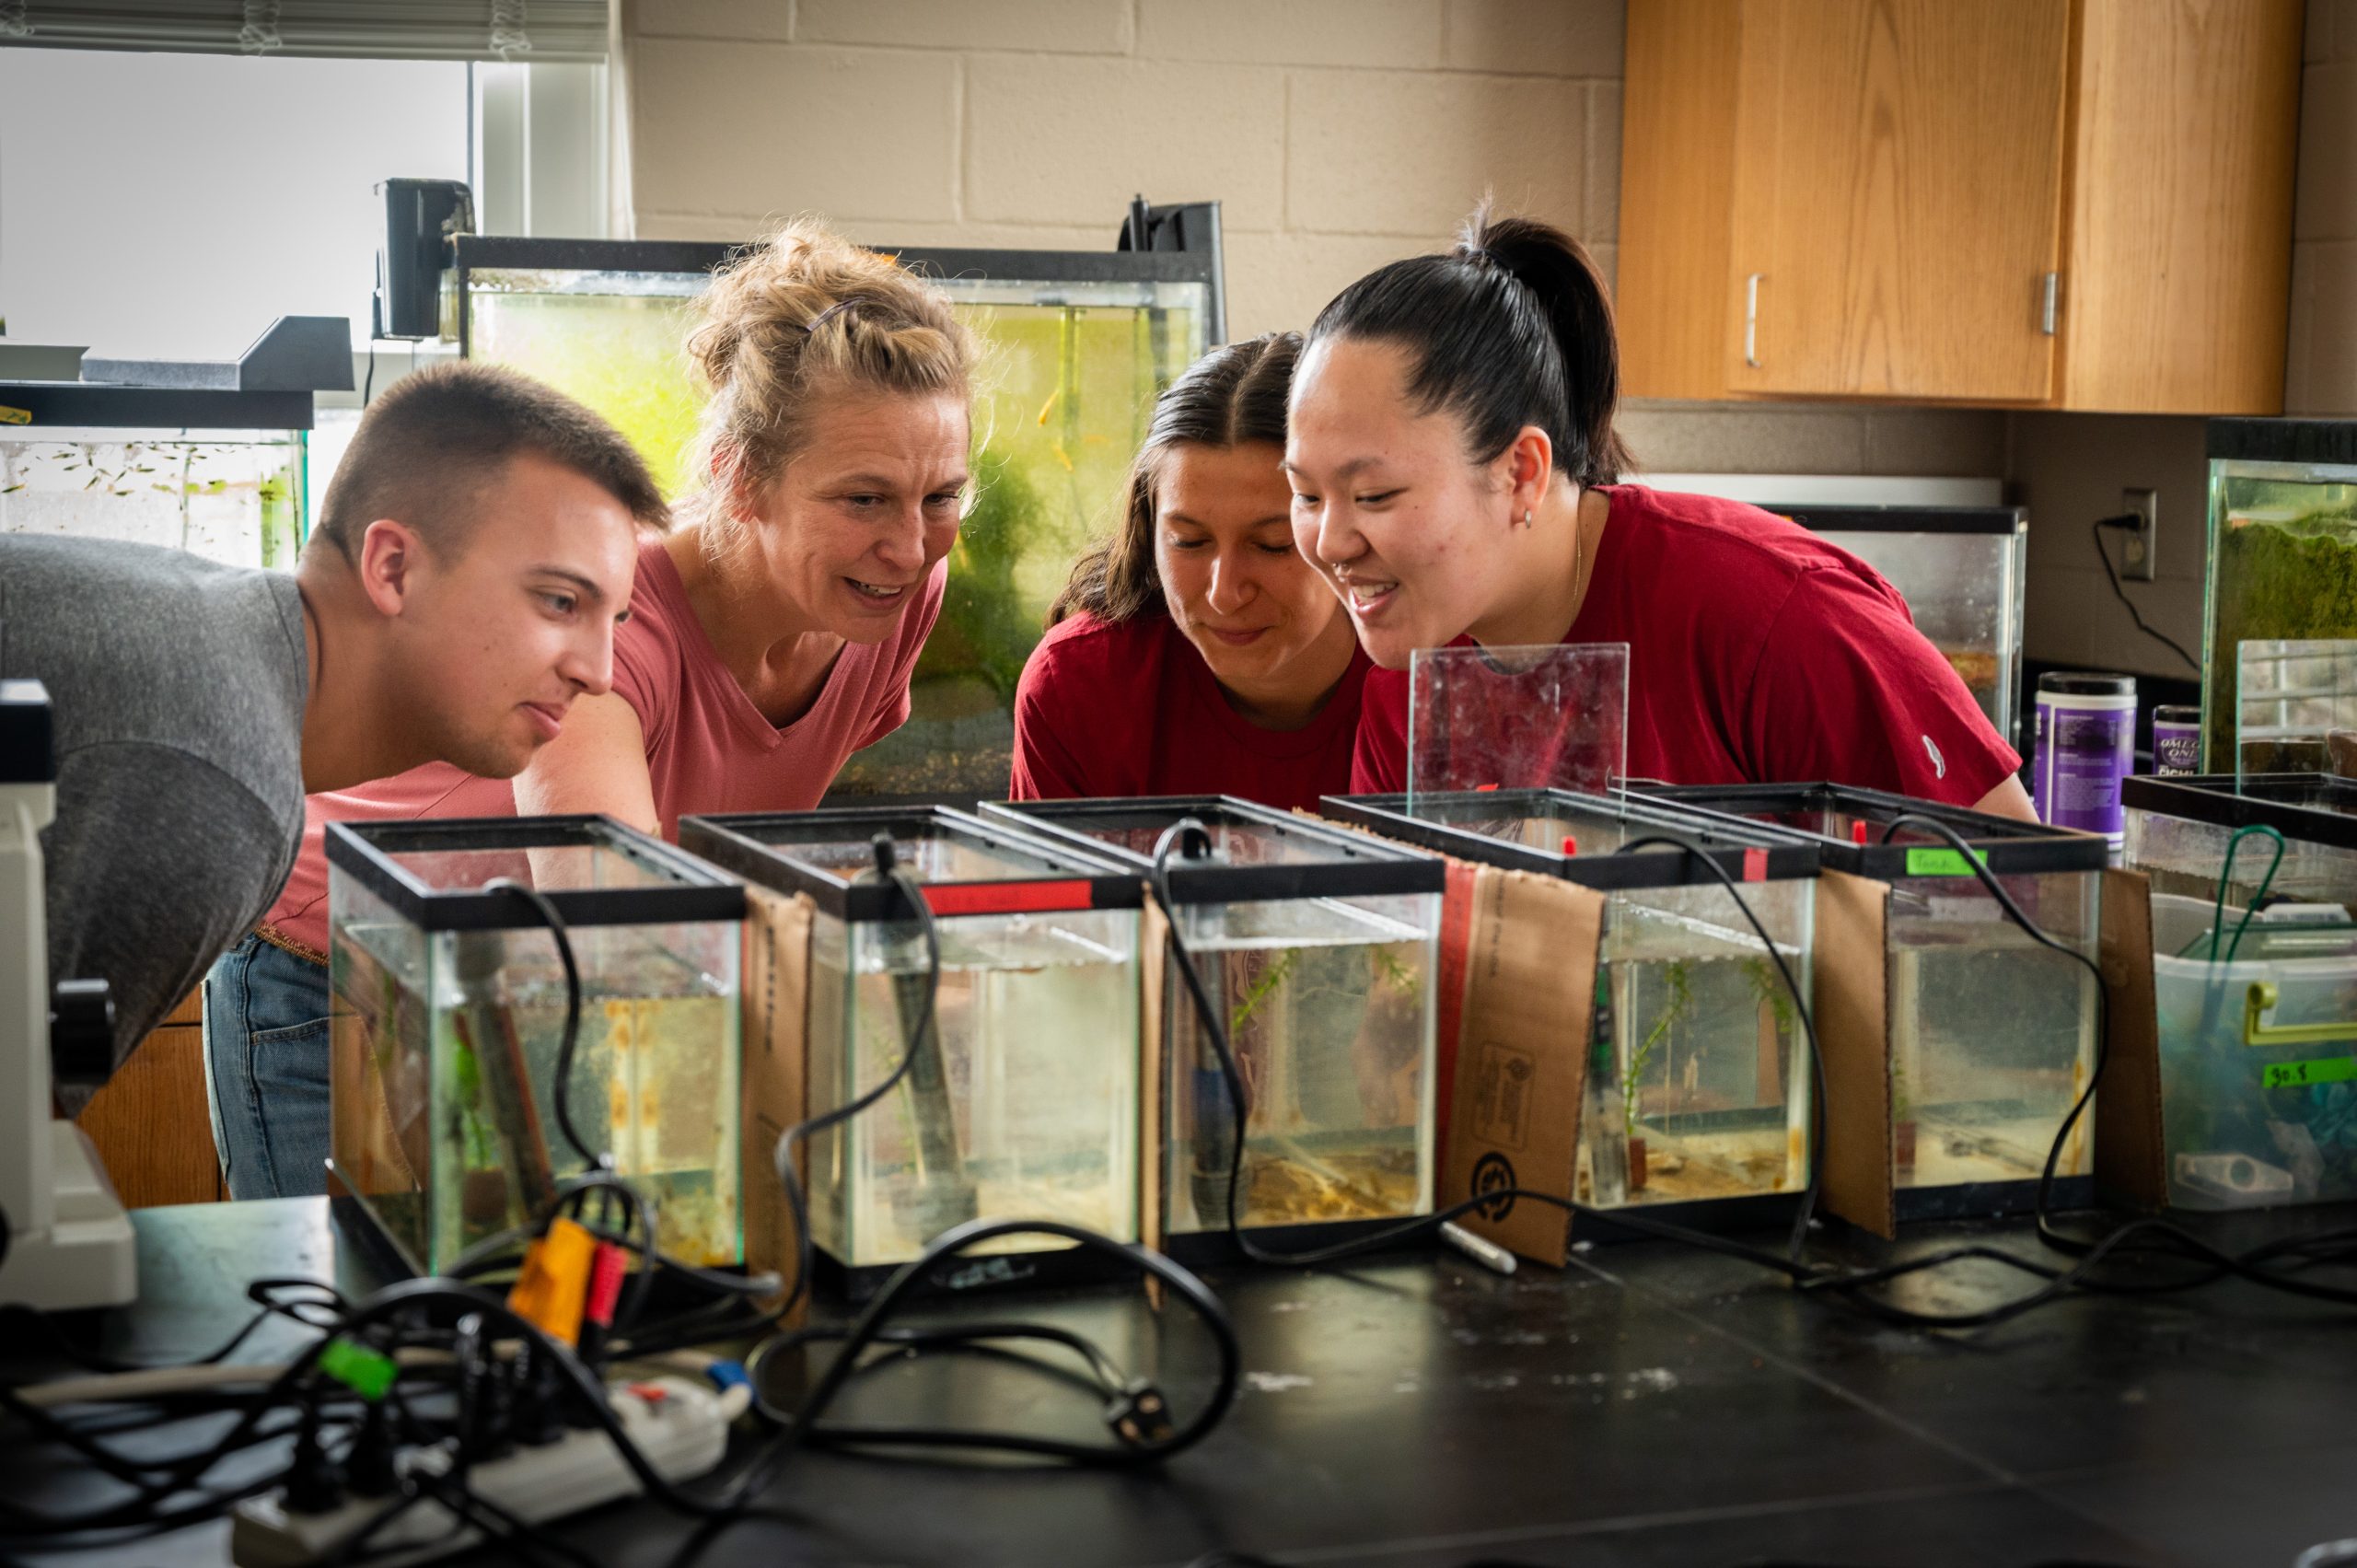 Betta fish research offers opportunity for faculty-student collaboration at Transylvania